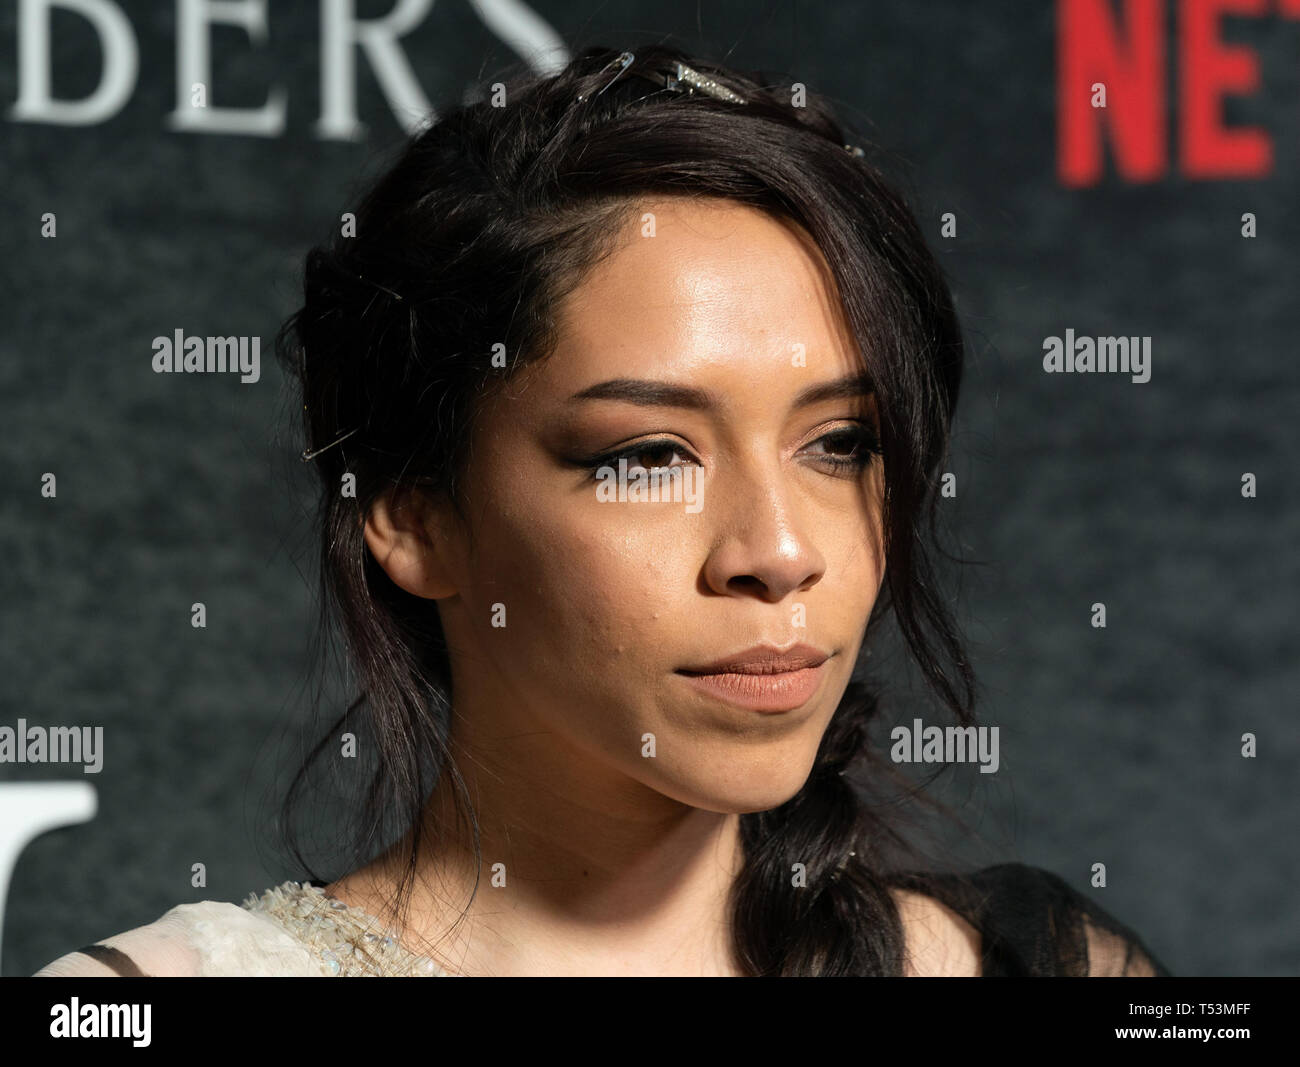 NEW YORK, NY - APRIL 15: Sivan Alyra Rose attends Netflix's 'Chambers'  Season 1 New York Premiere at Metrograph on April 15, 2019 in New York City  Stock Photo - Alamy